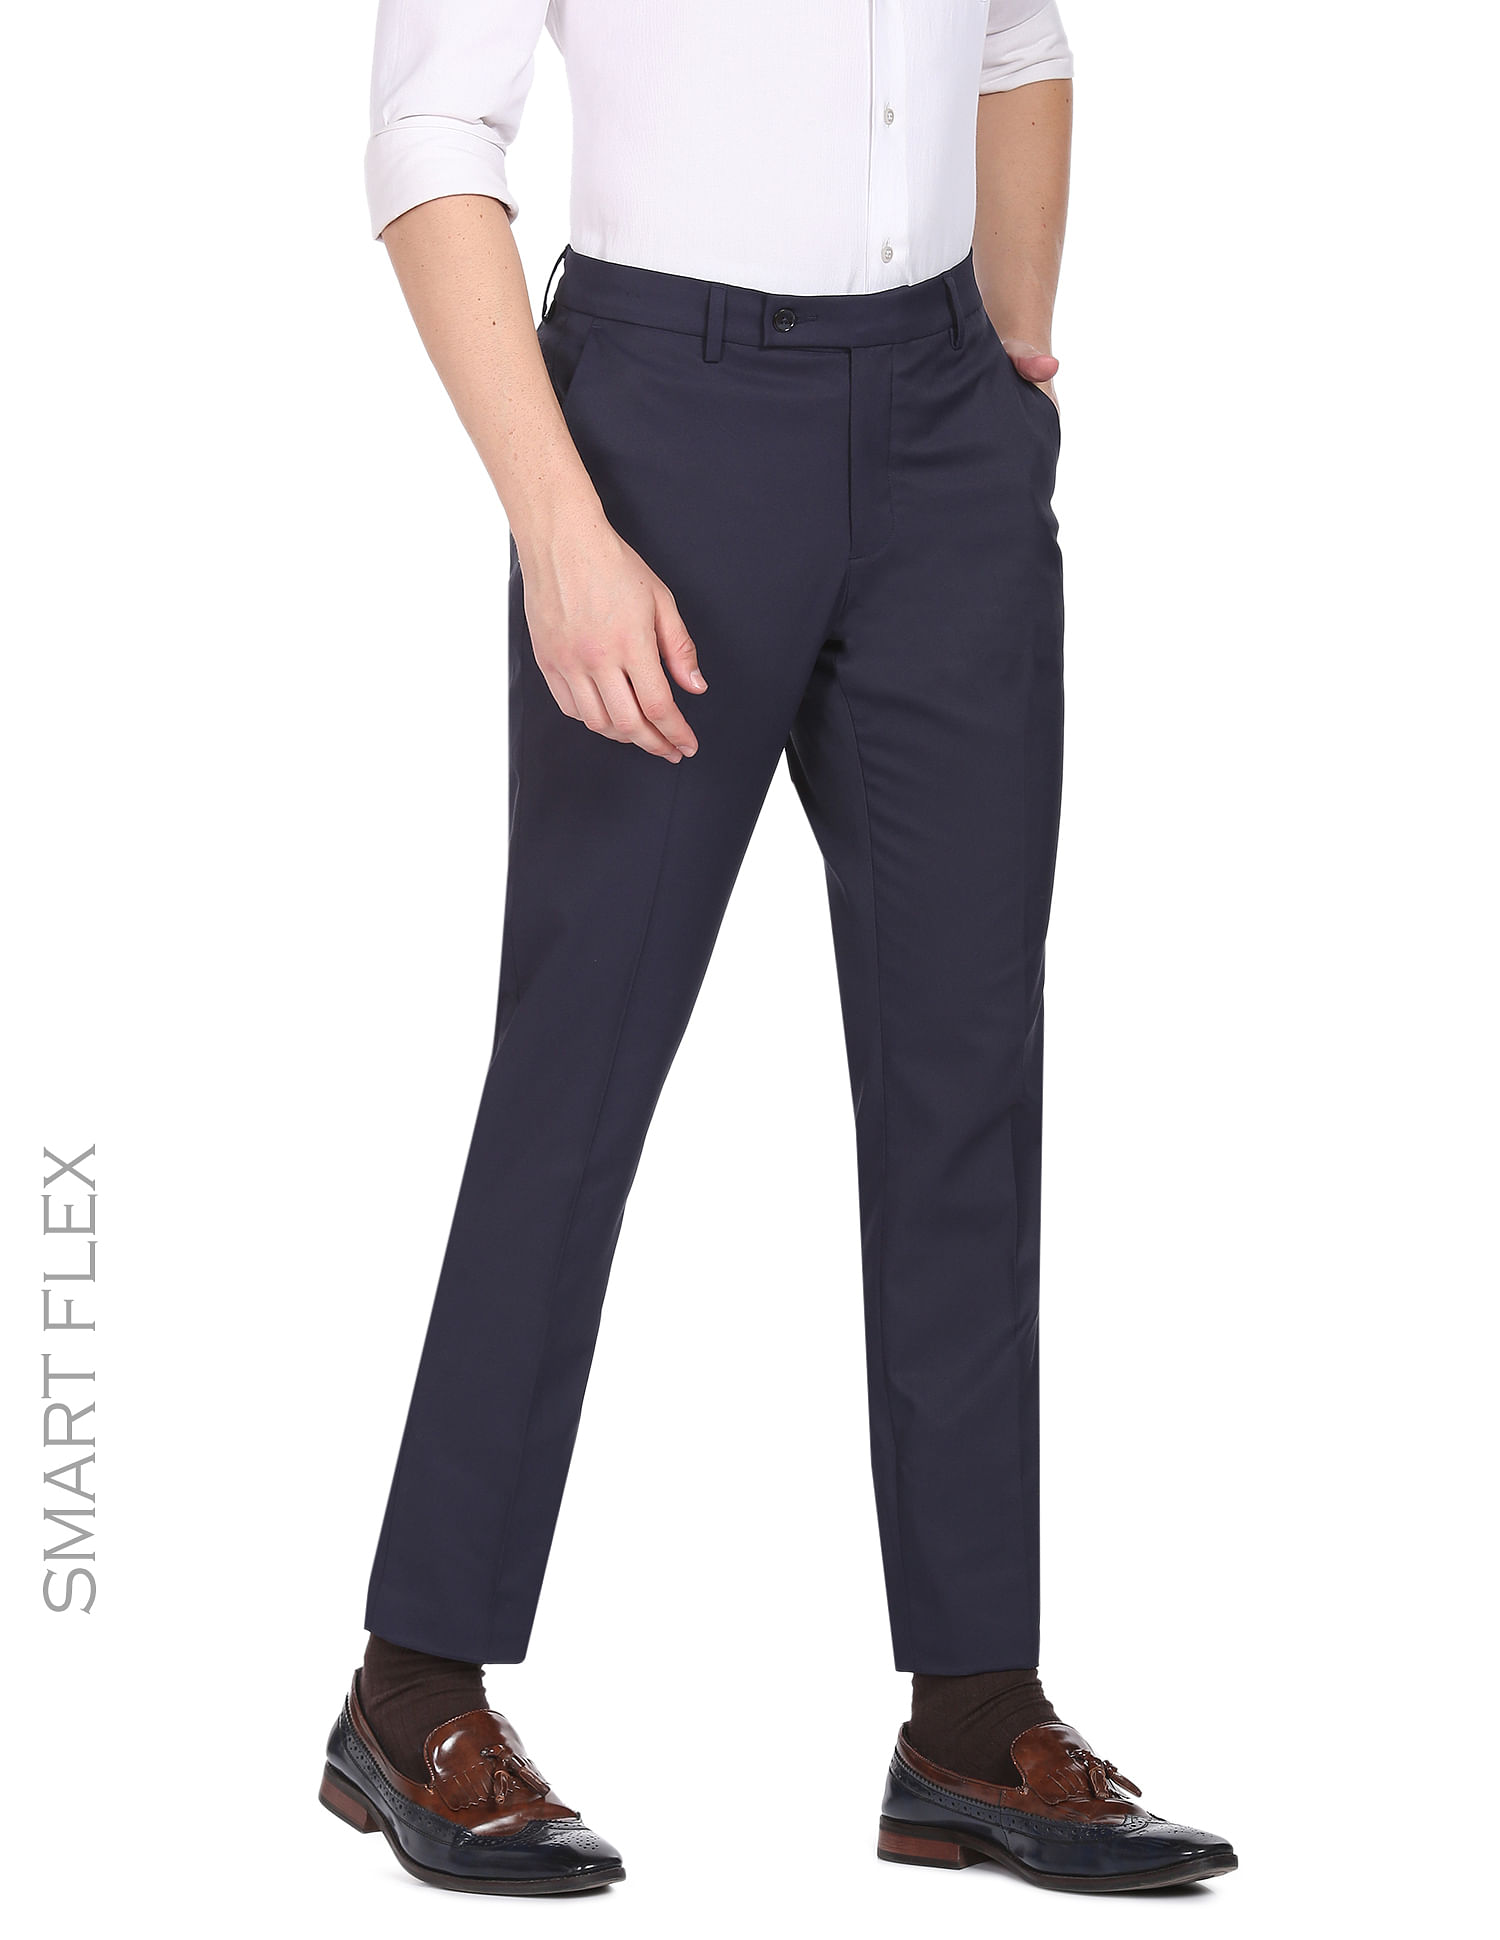 Arrow Navy Blue Solid Slim Fit Formal Trouser 5300105htm  Buy Arrow Navy  Blue Solid Slim Fit Formal Trouser 5300105htm online in India